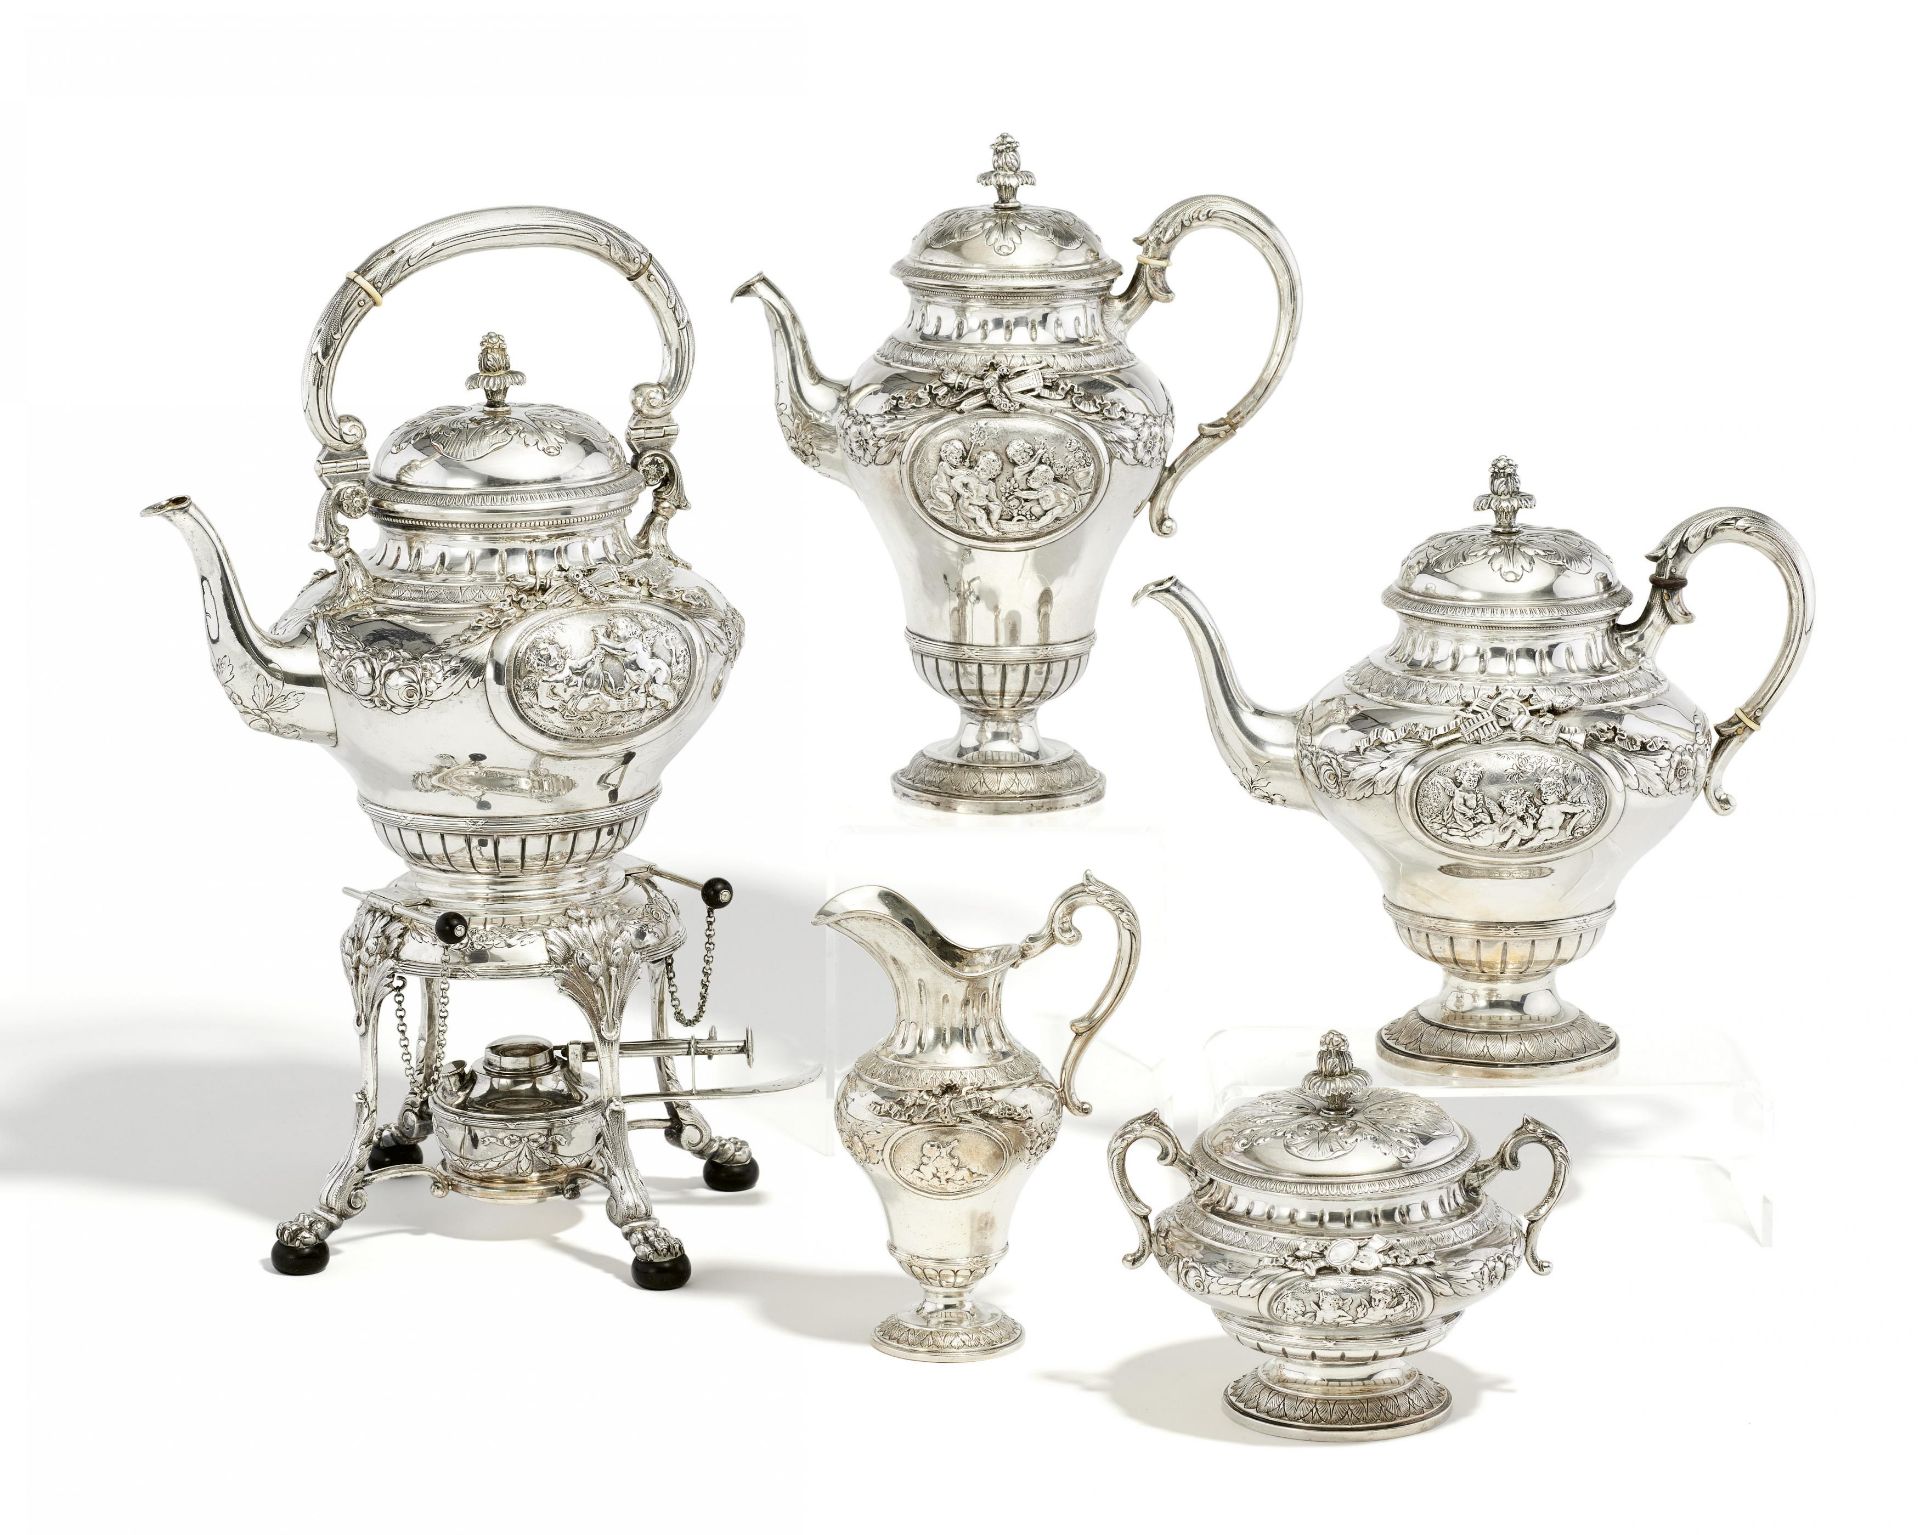 MAGNIFICENT FIVE PIEC SILVER COFFEE AND TEA SERVICE. Hanau. Ca. 1900. J.D. Schleissner & Sons.